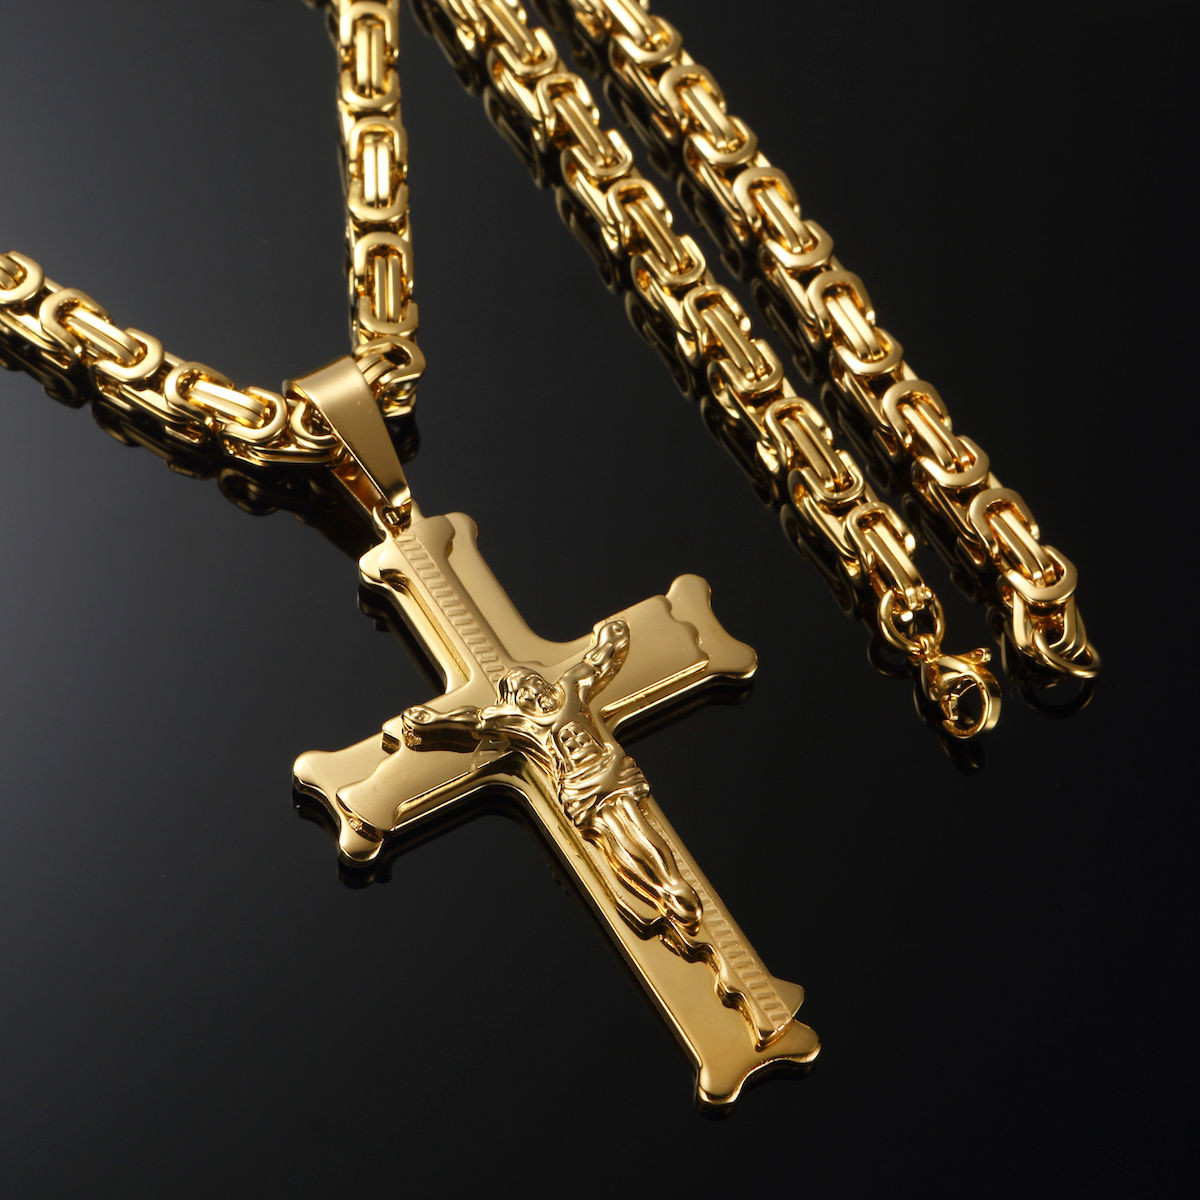 The 20 Best Ideas for Gold Cross Necklaces for Men - Home, Family ...